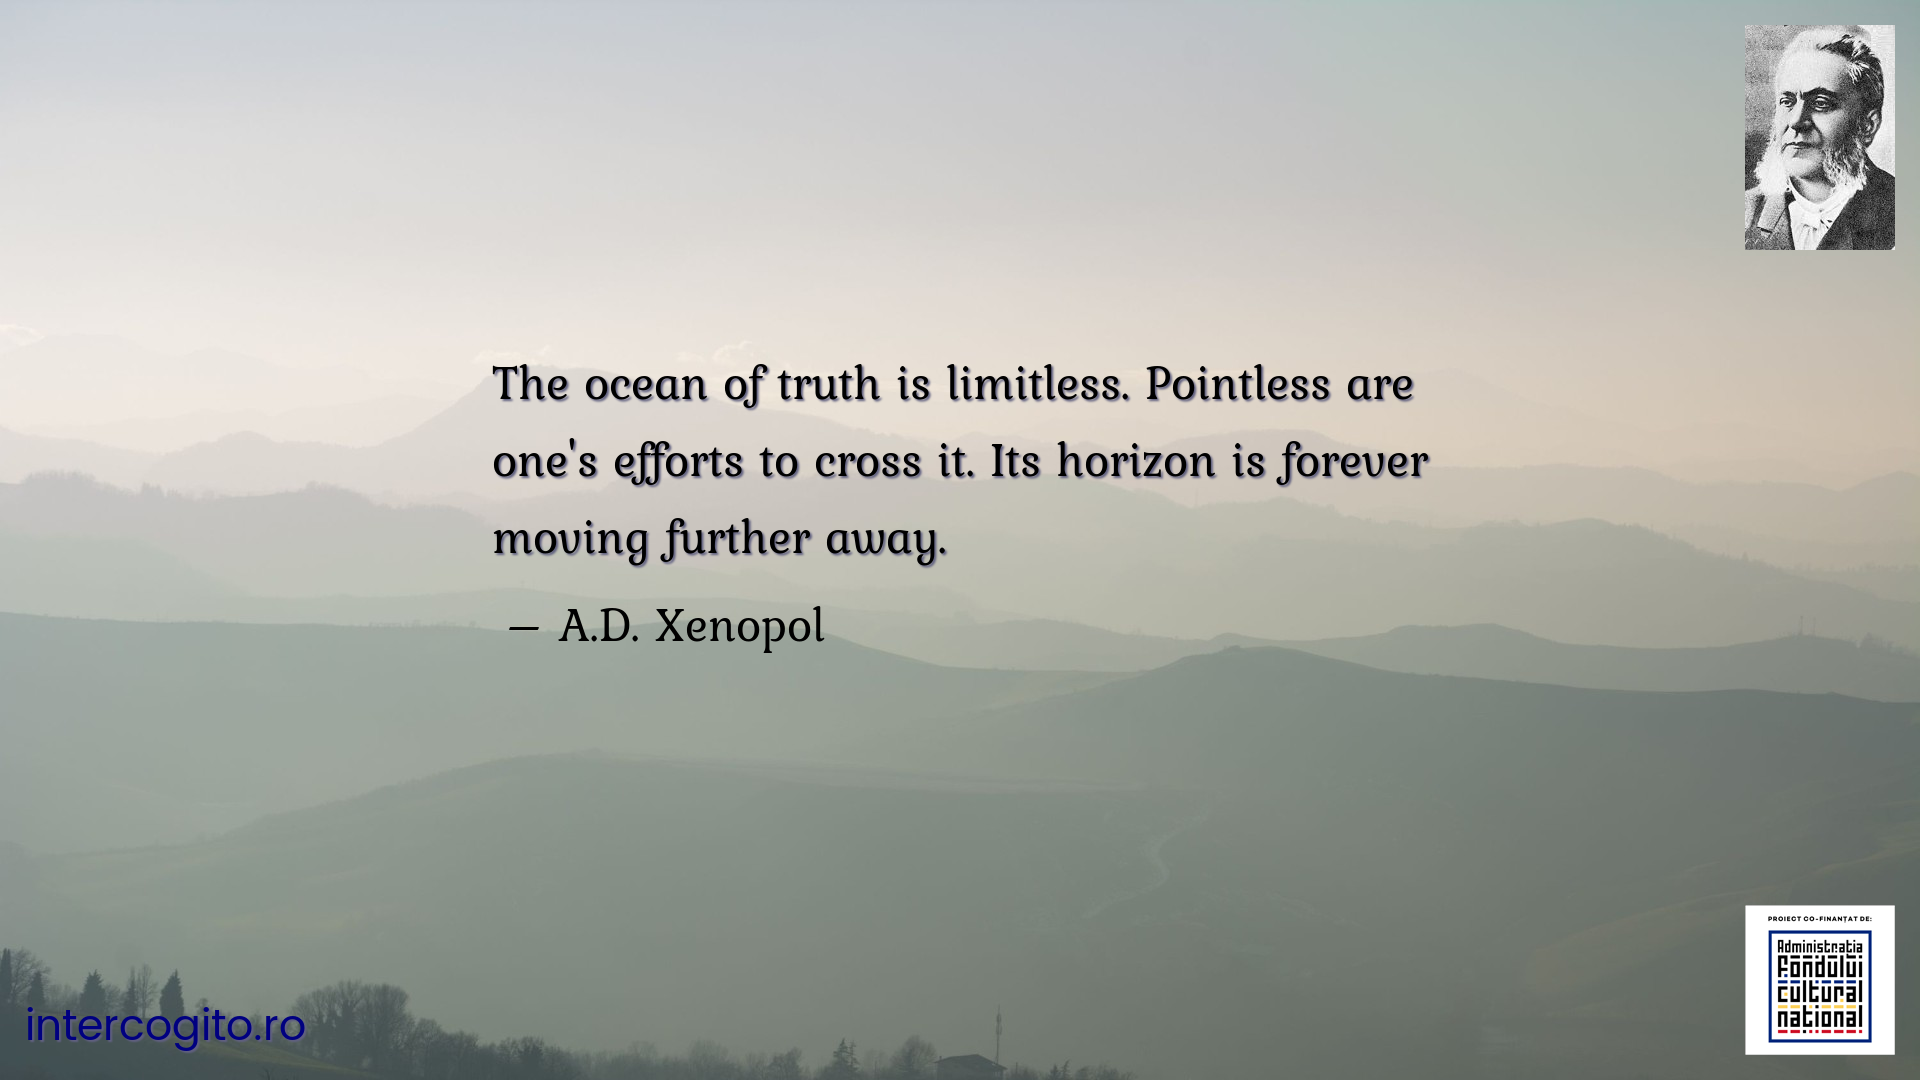 The ocean of truth is limitless. Pointless are one's efforts to cross it. Its horizon is forever moving further away.